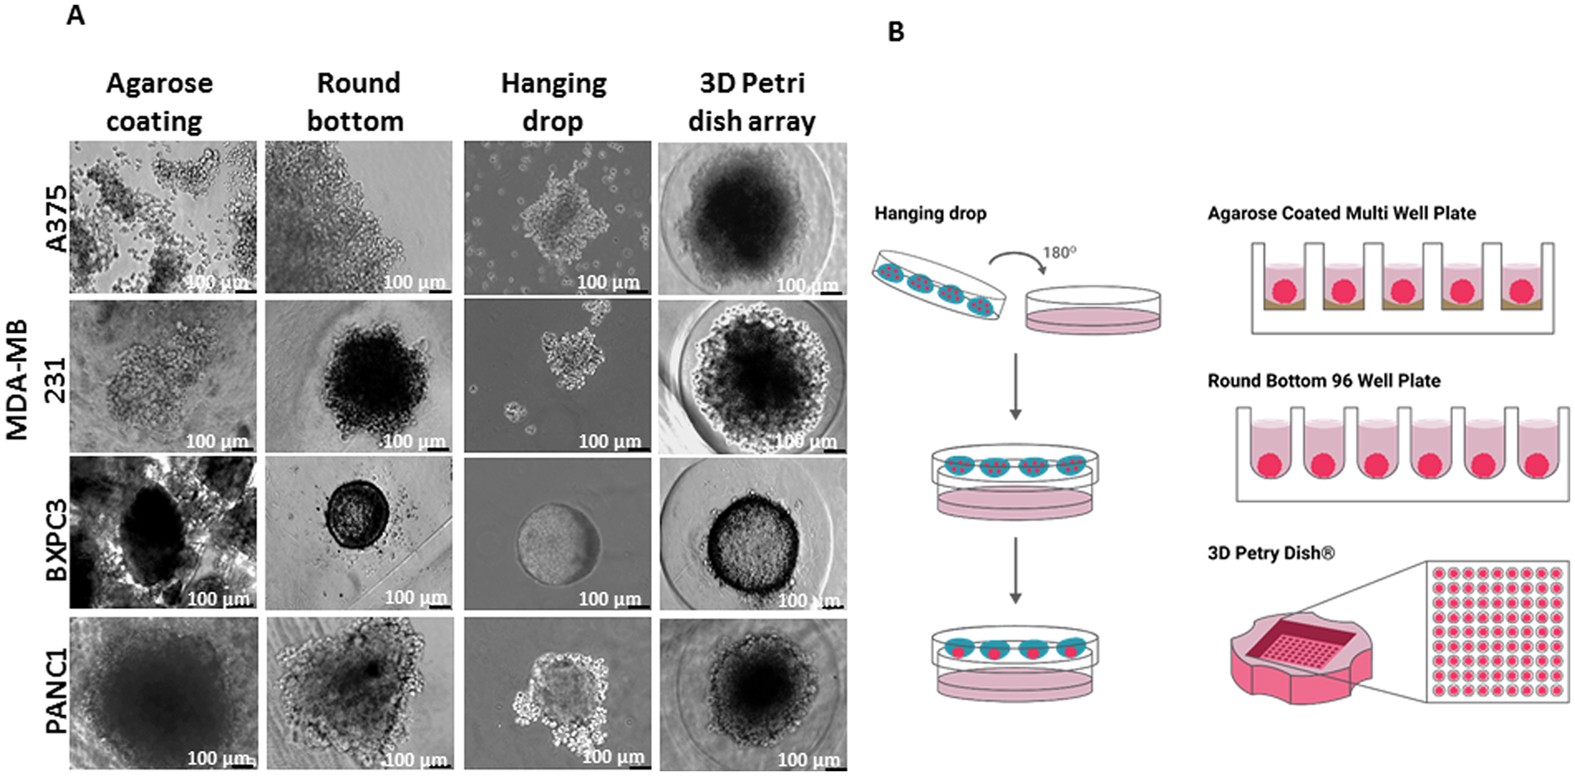 Cell viability and proliferation of hanging drop generated MDA-MB